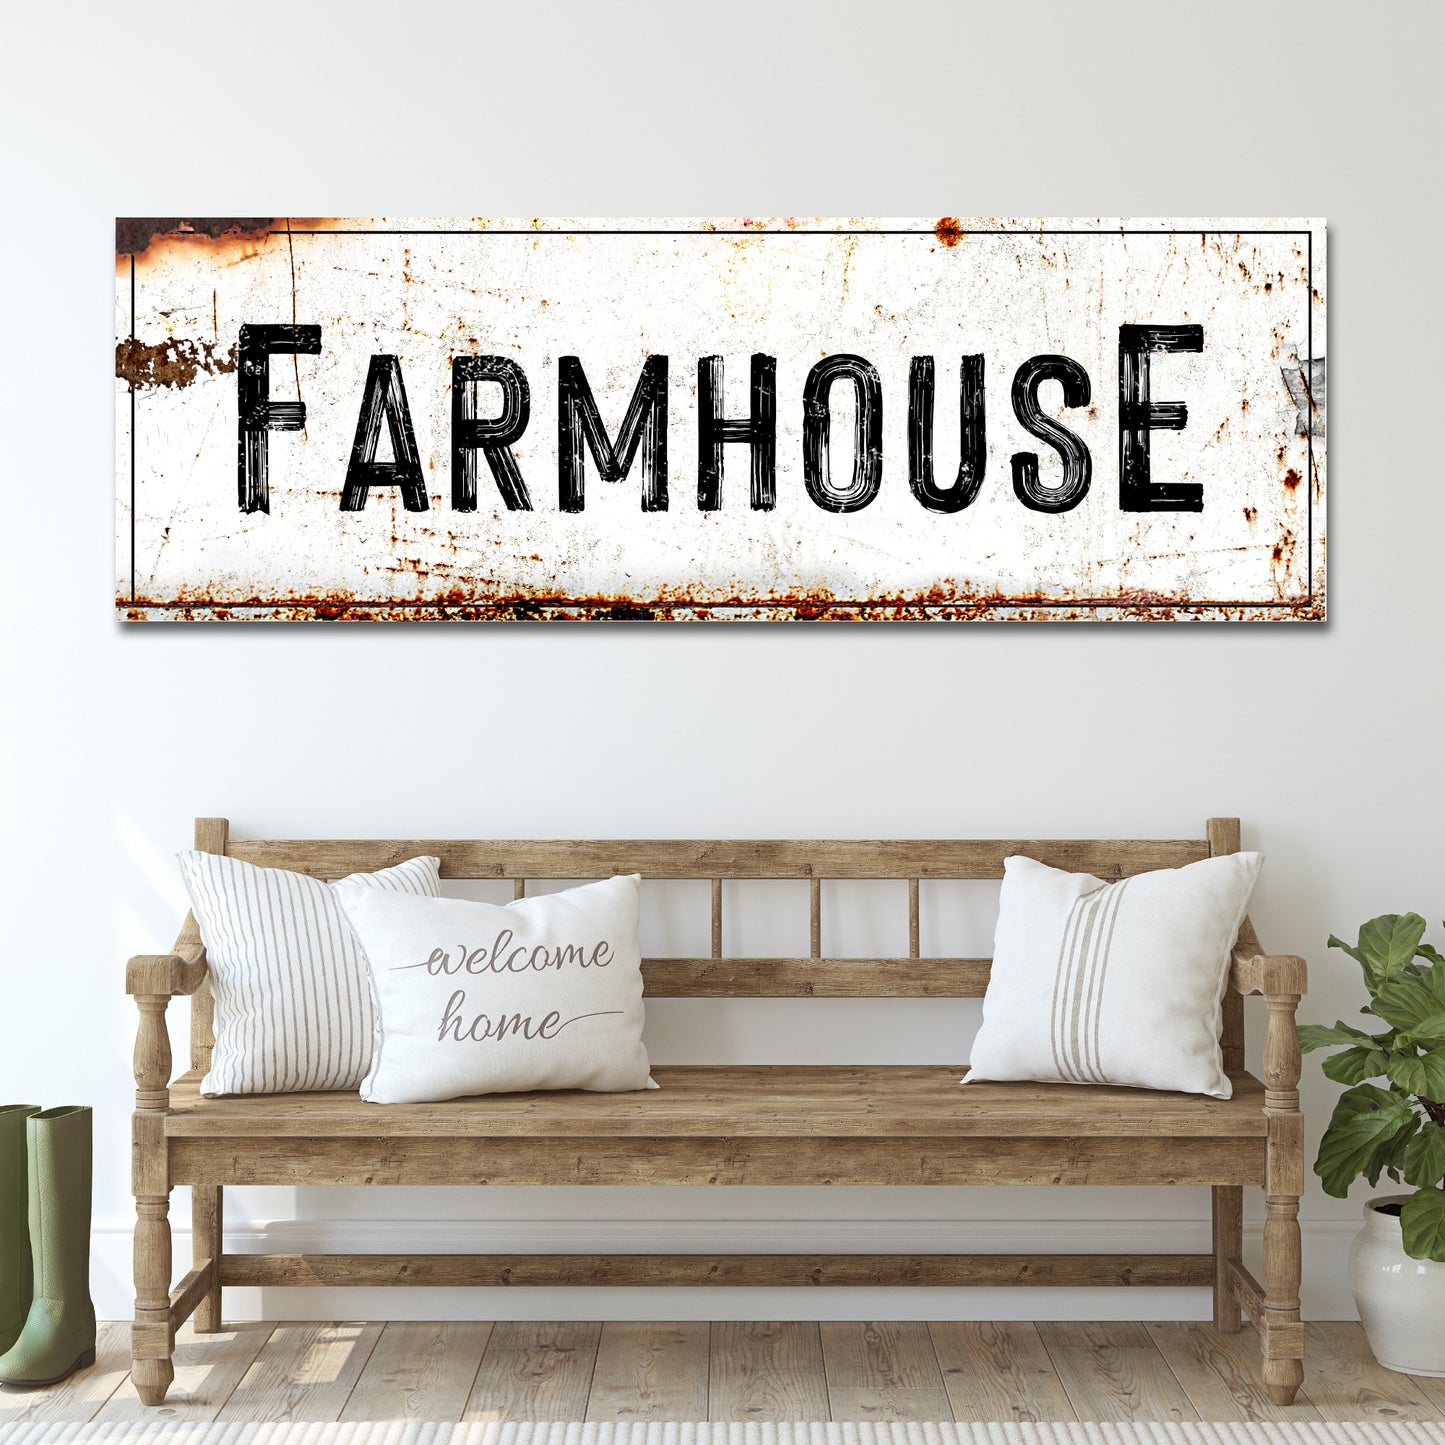 Farmhouse Sign - Image by Tailored Canvases